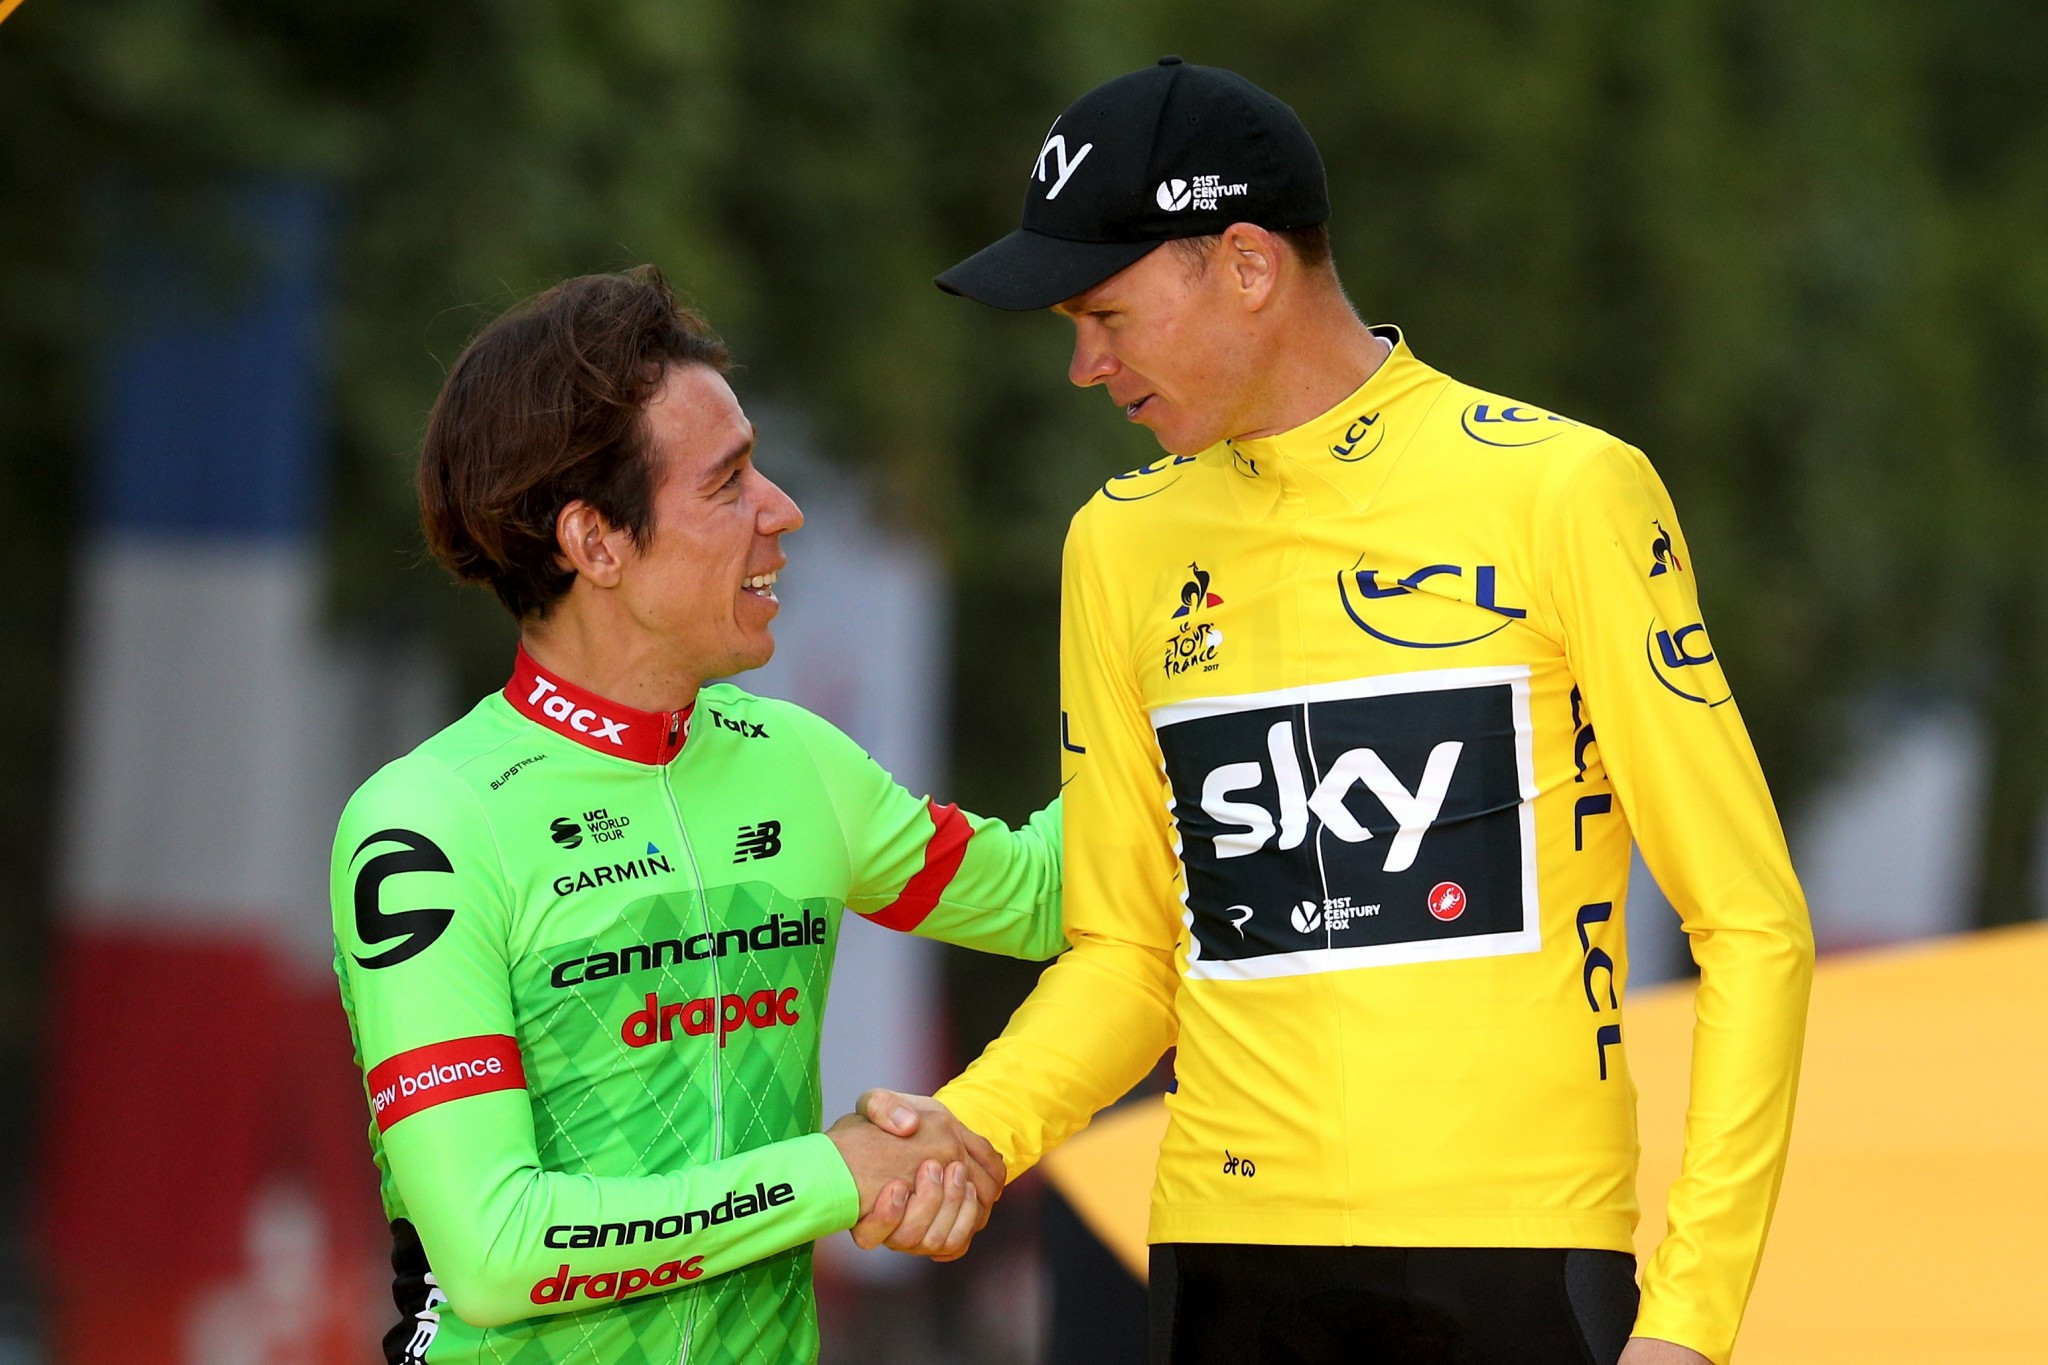 Rigoberto Uran, left, finished second at the Tour de France but faces uncertainty over his team for next year ©Getty Images